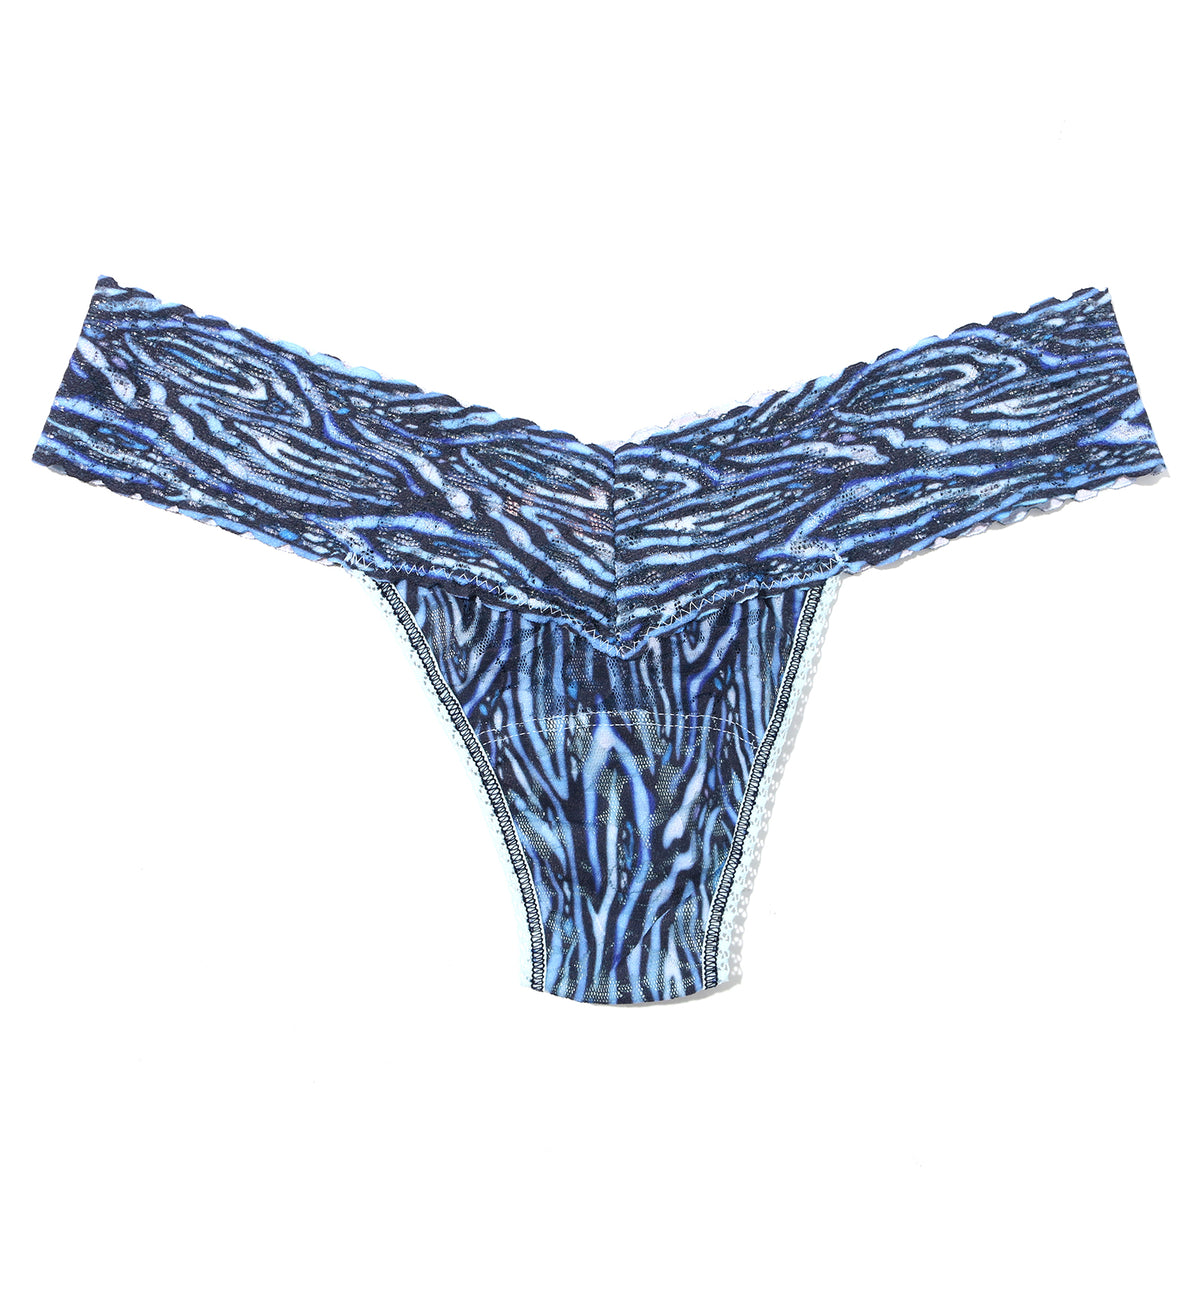 Hanky Panky Signature Lace Printed Low Rise Thong (PR4911P),Sea You - Sea You,One Size